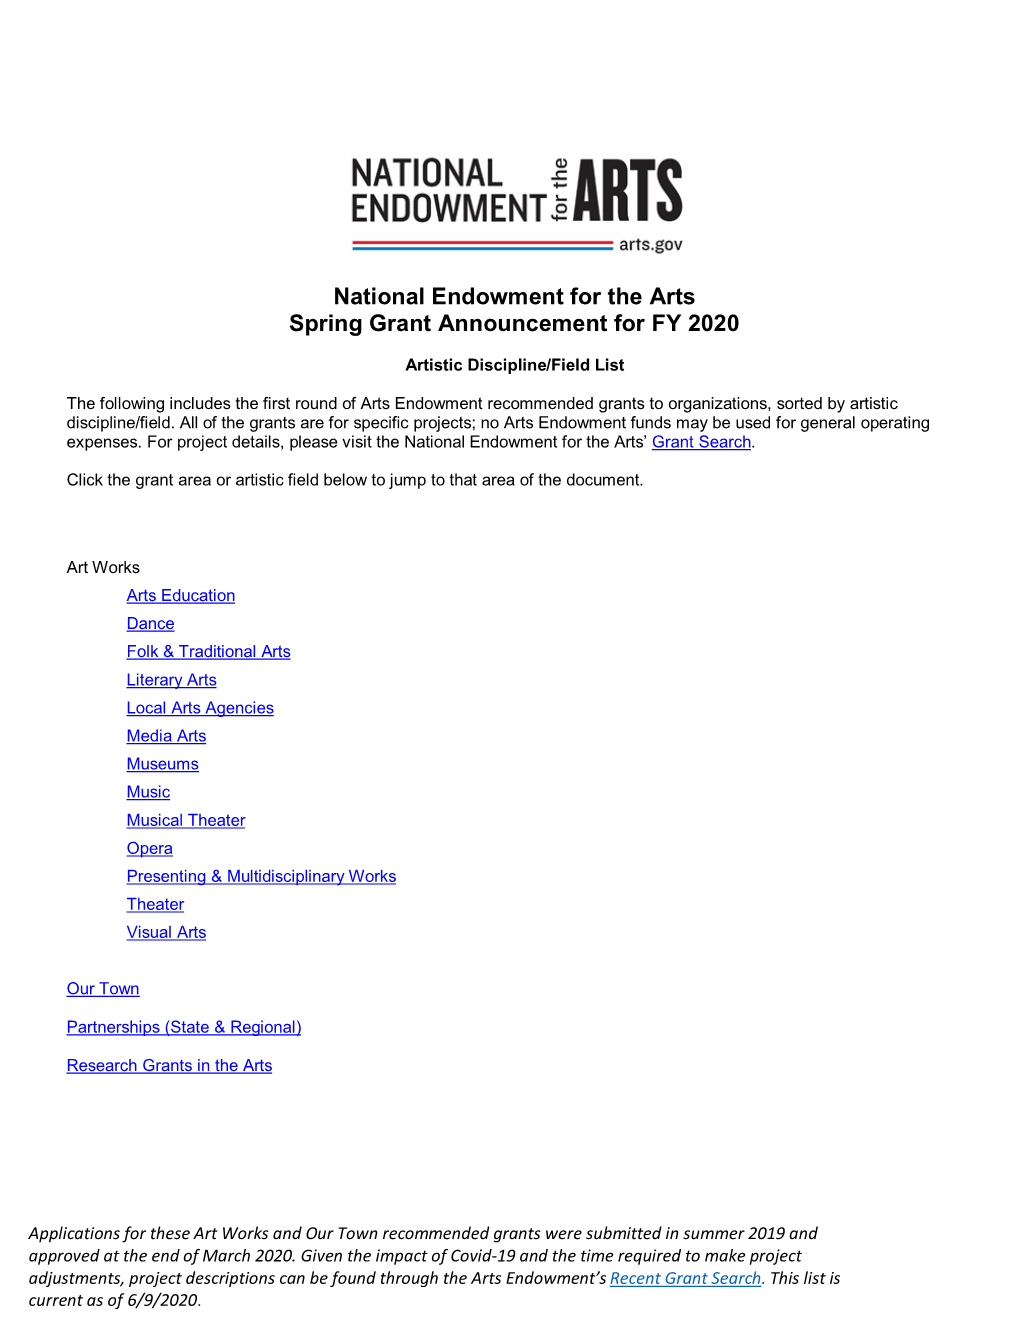 National Endowment for the Arts Spring Grant Announcement for FY 2020